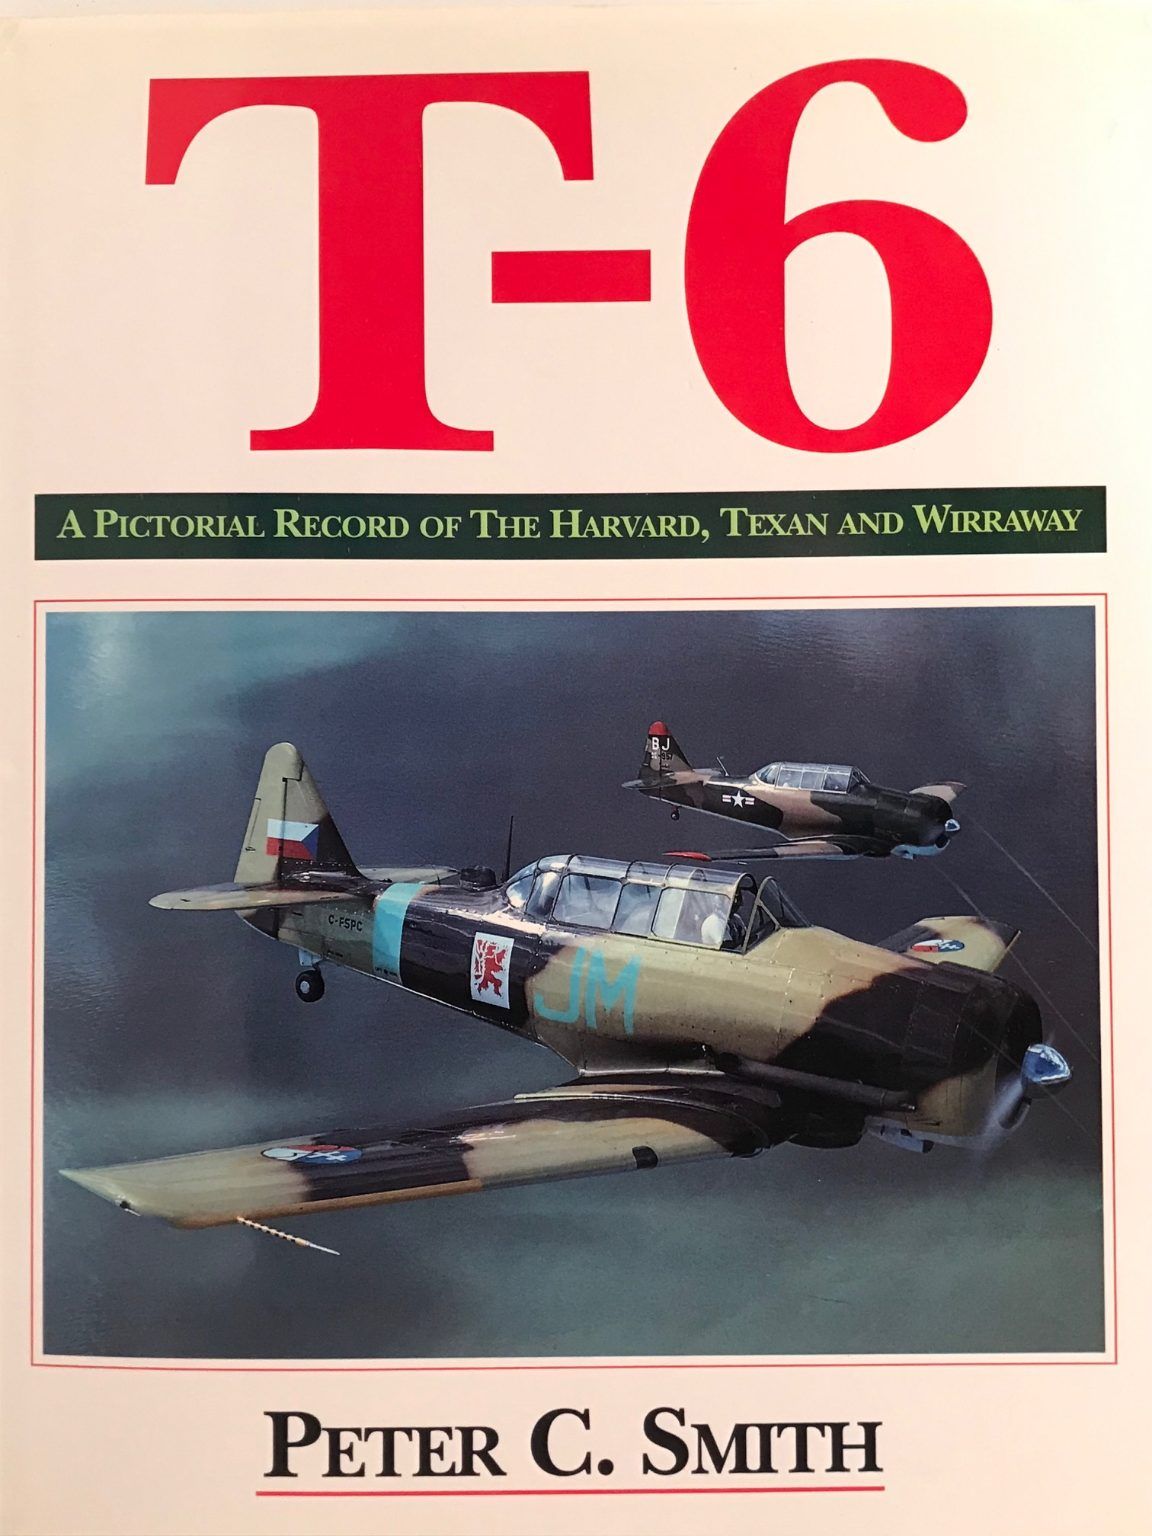 T-6: A Pictorial Record of The Harvard, Texan and Wirraway